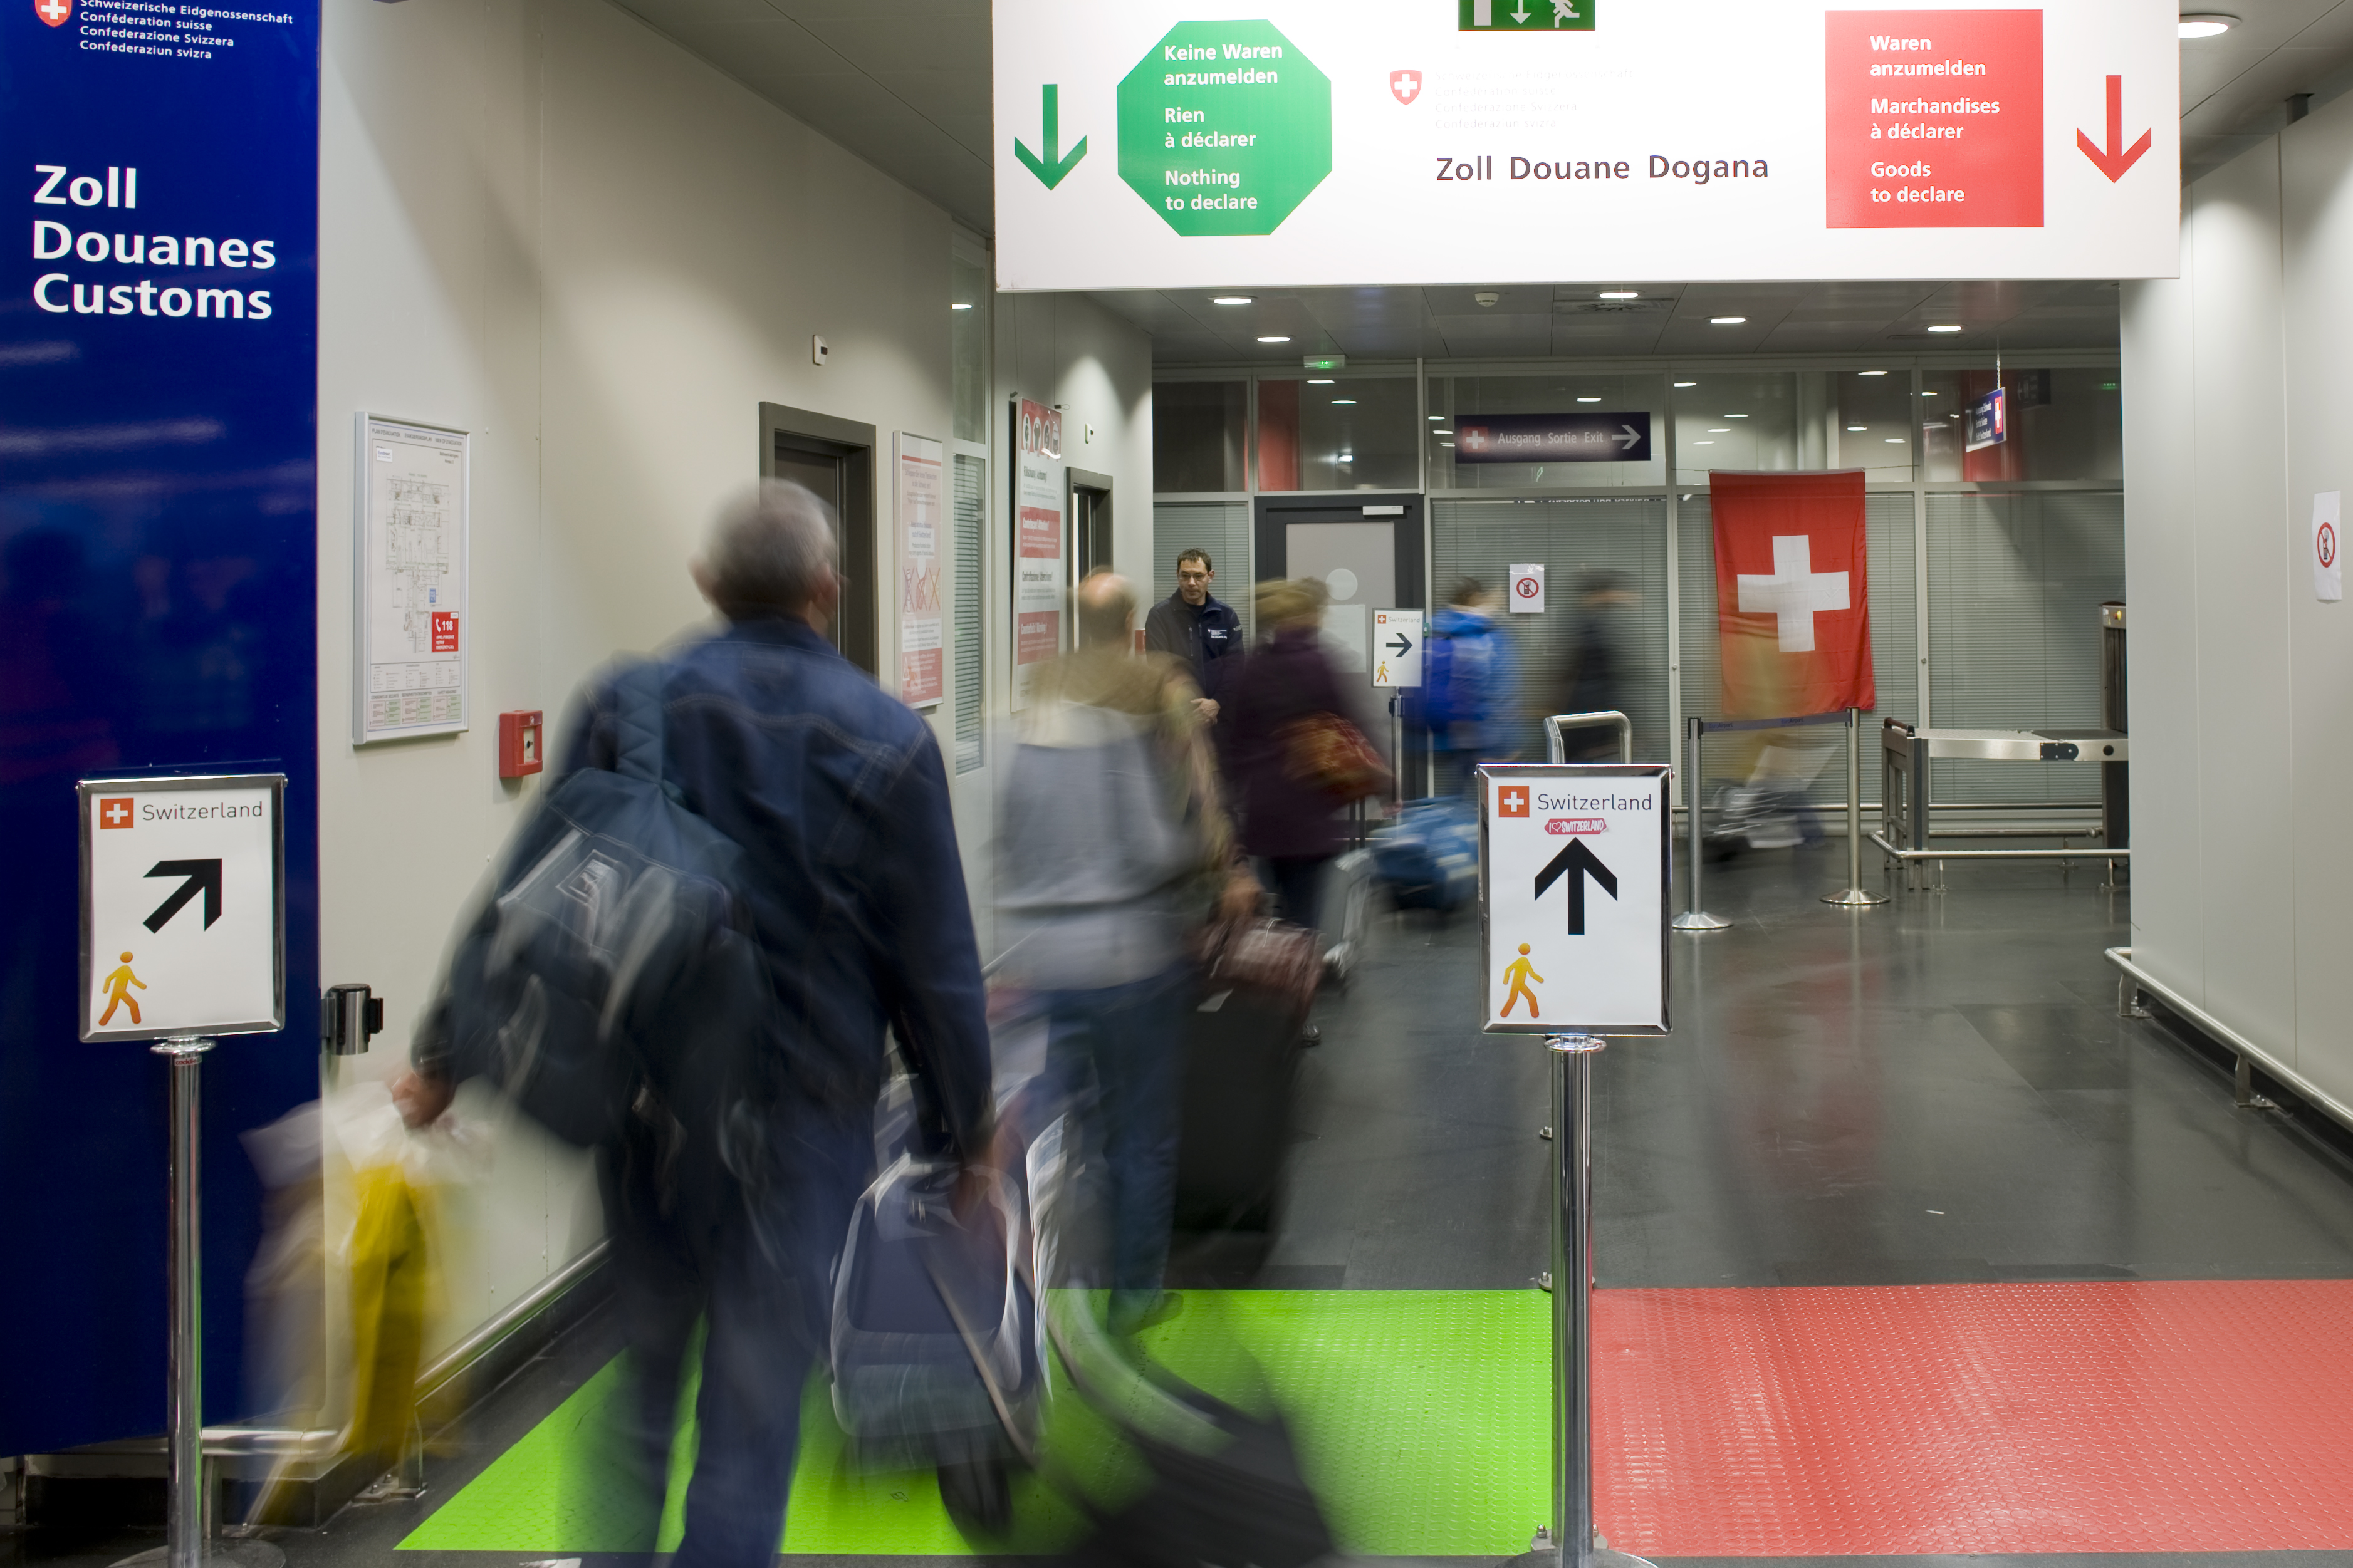 Travelers go through red / green passage at airport